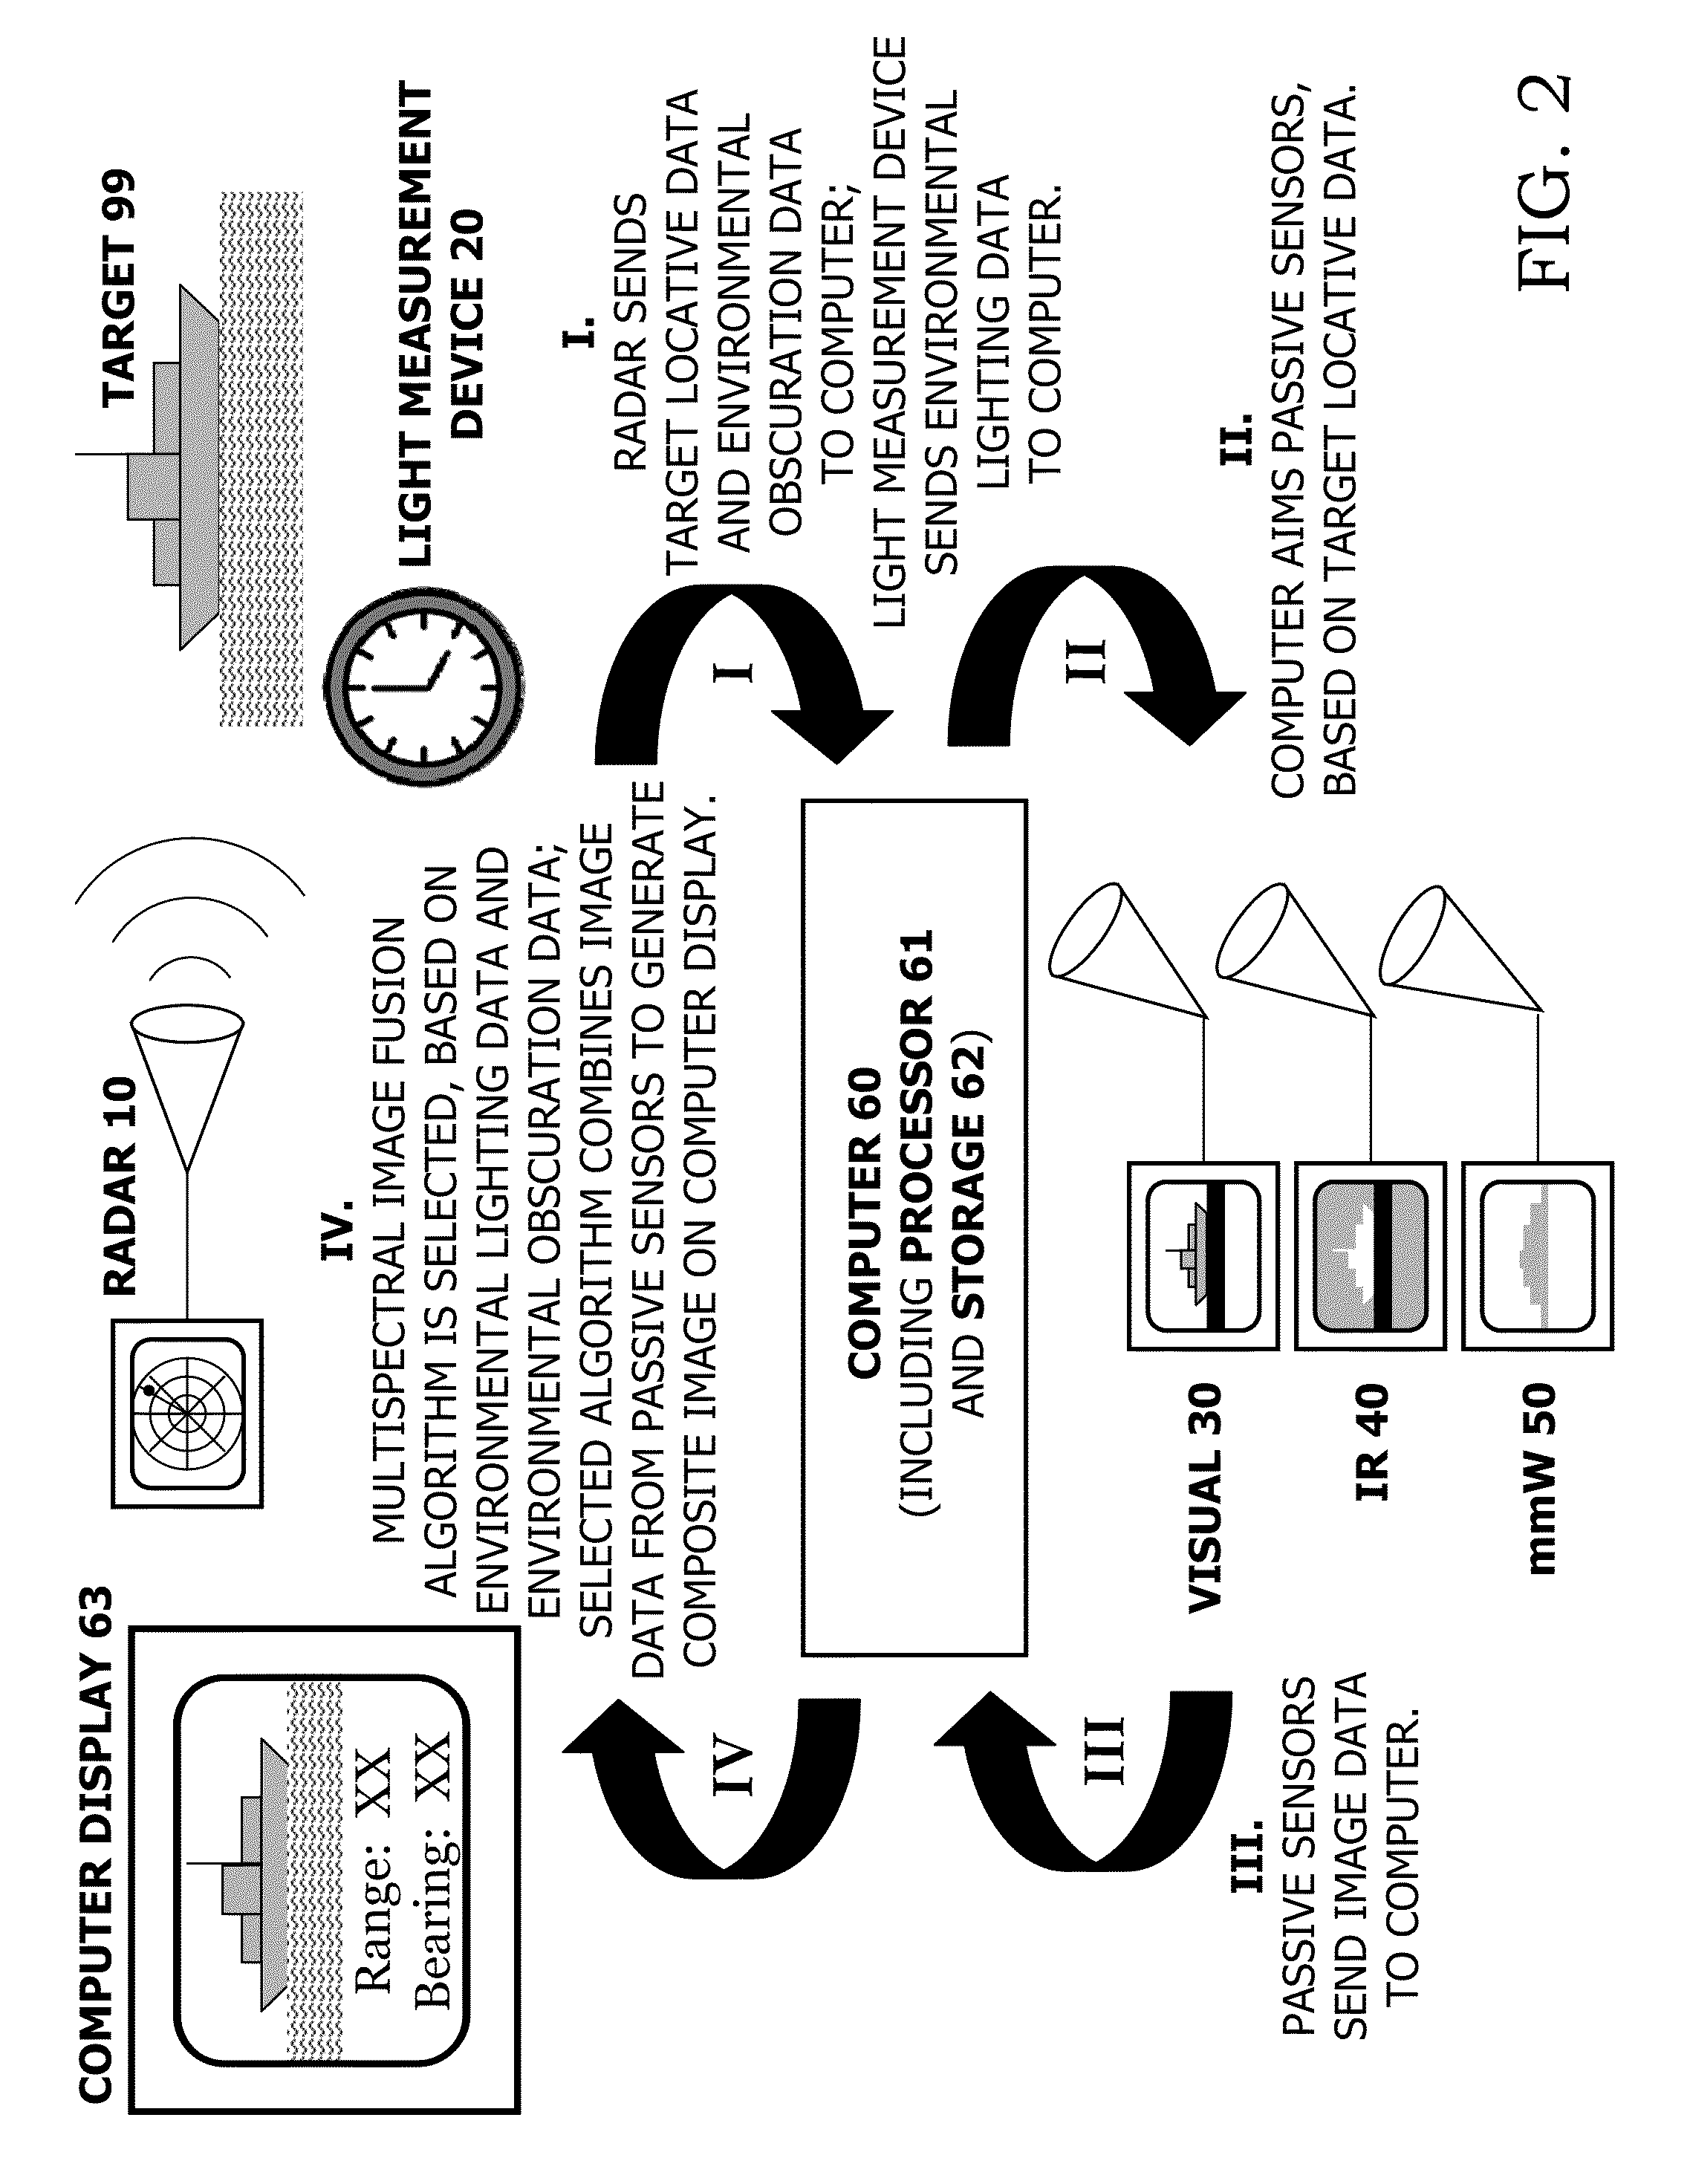 Active-radar-assisted passive composite imagery for aiding navigation or detecting threats